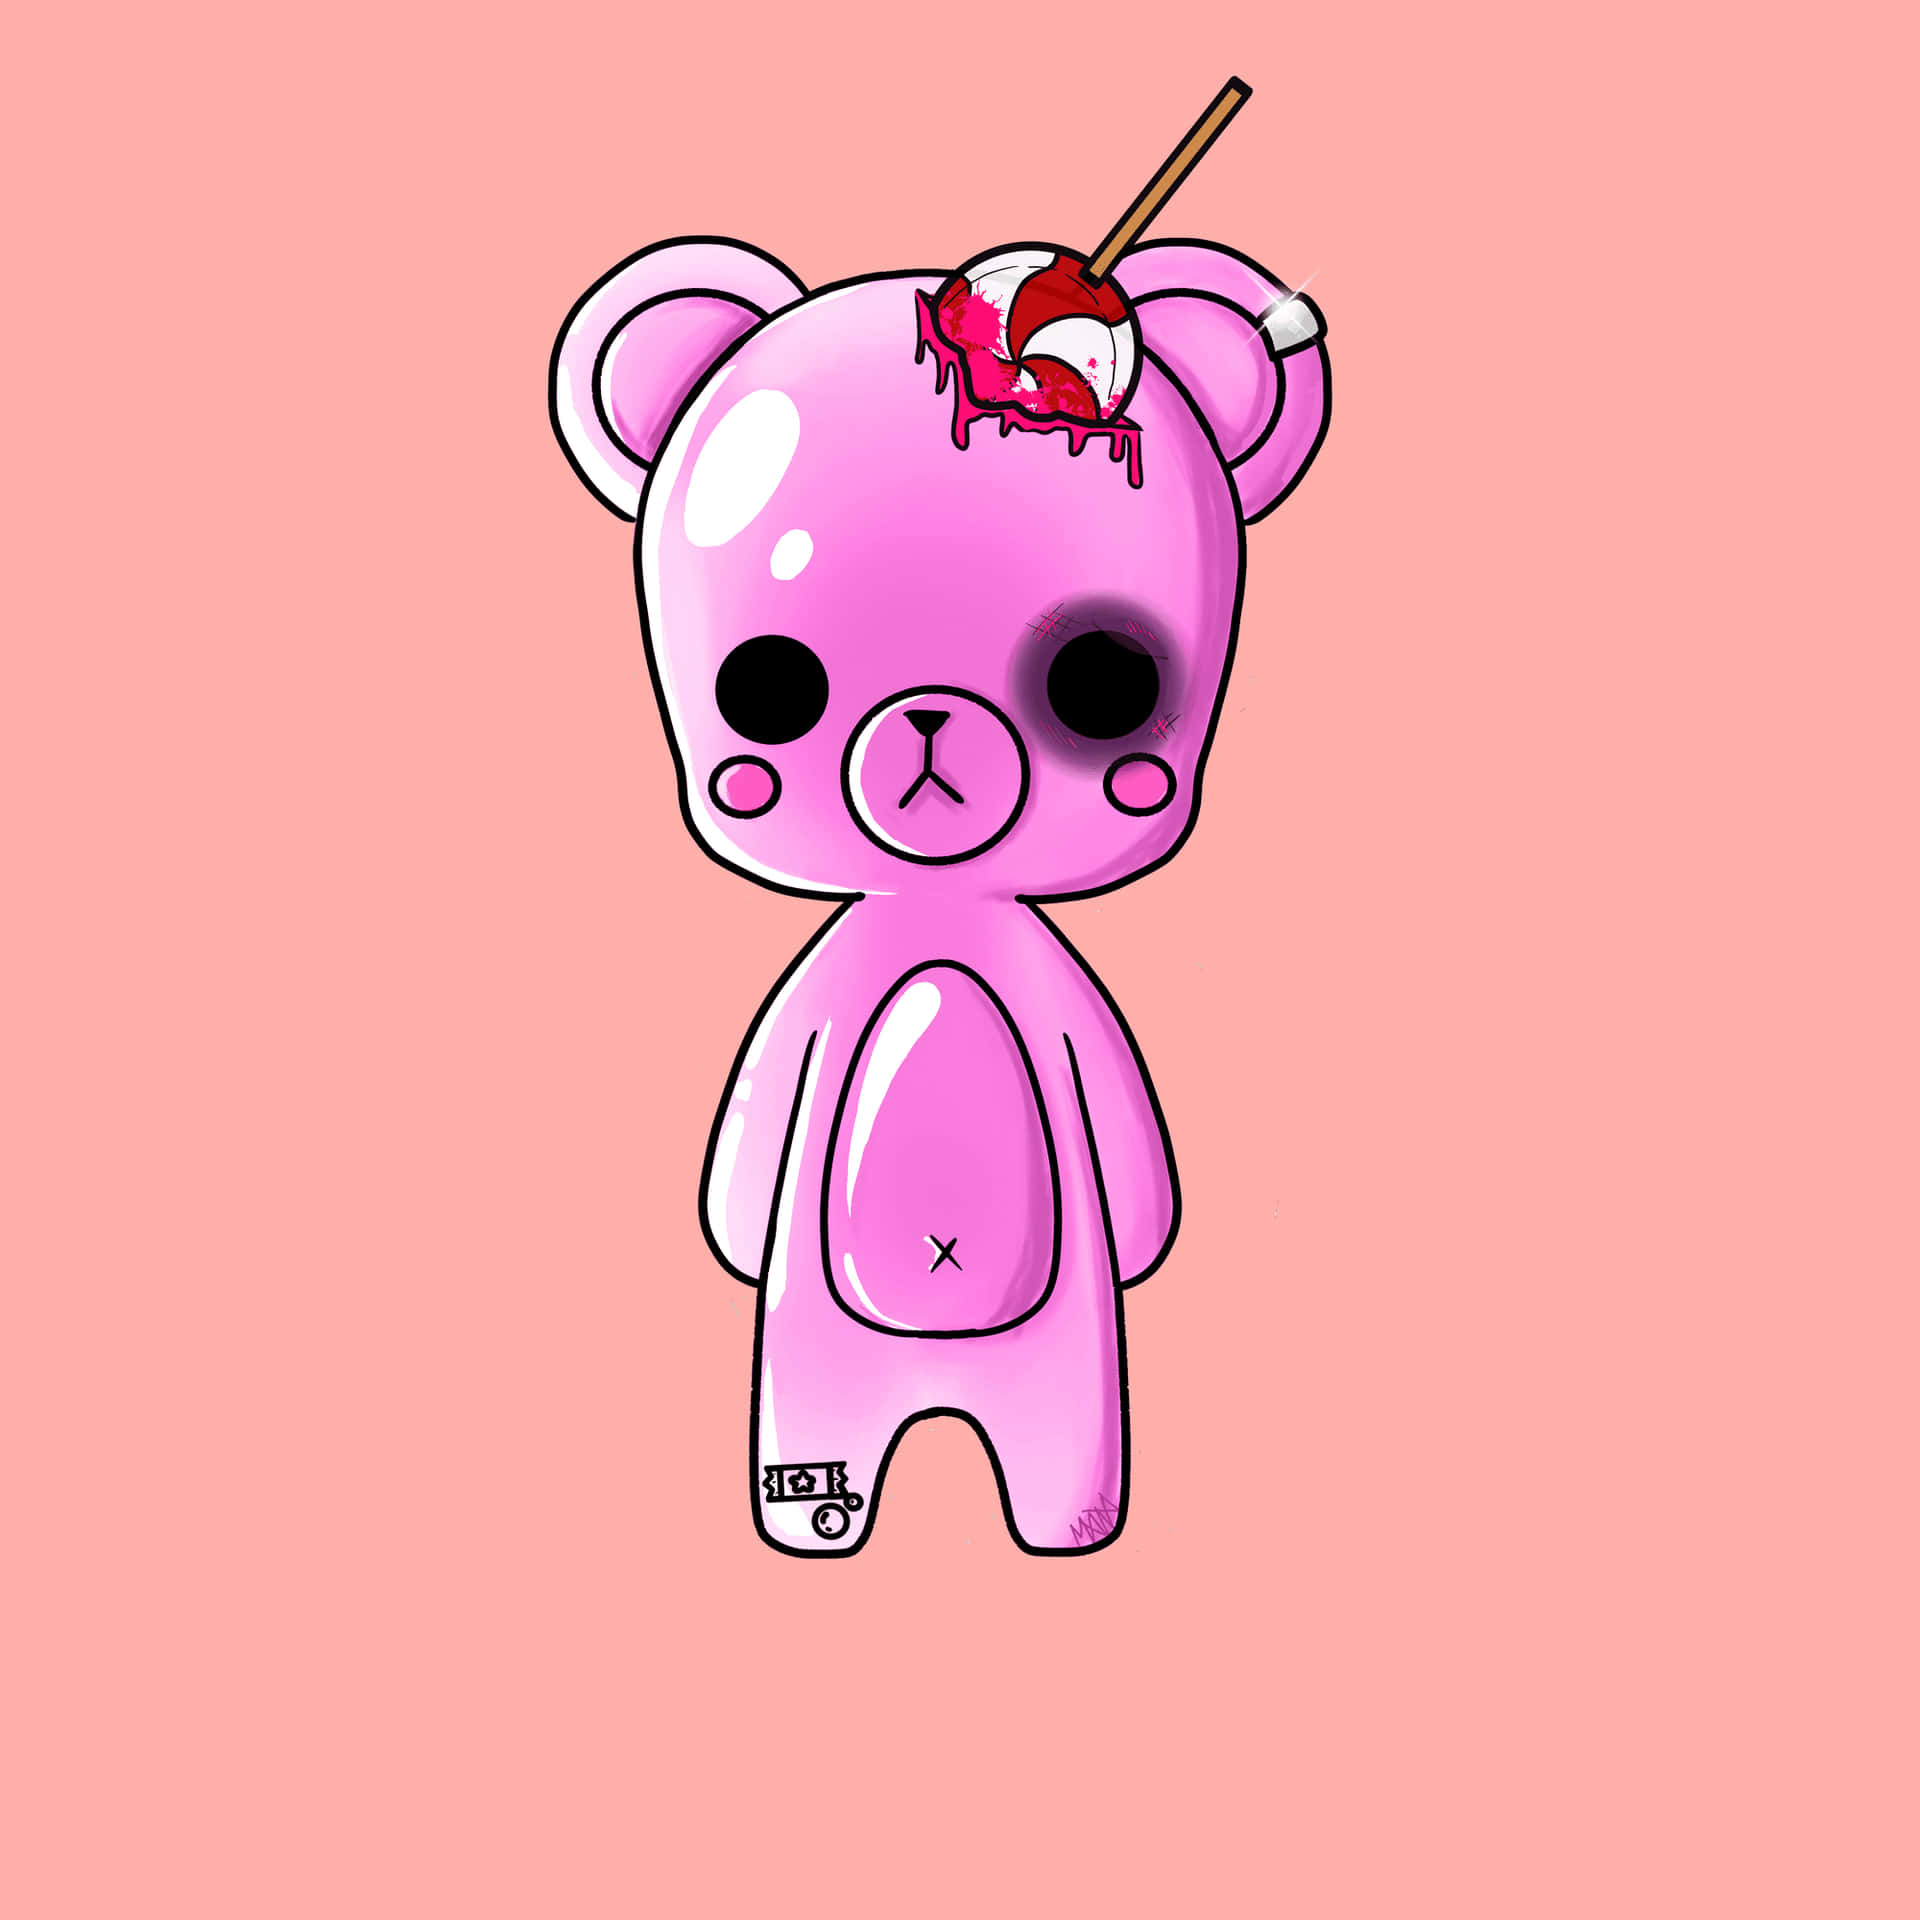 "A Look Into The Soul of Gloomy Bear" Wallpaper